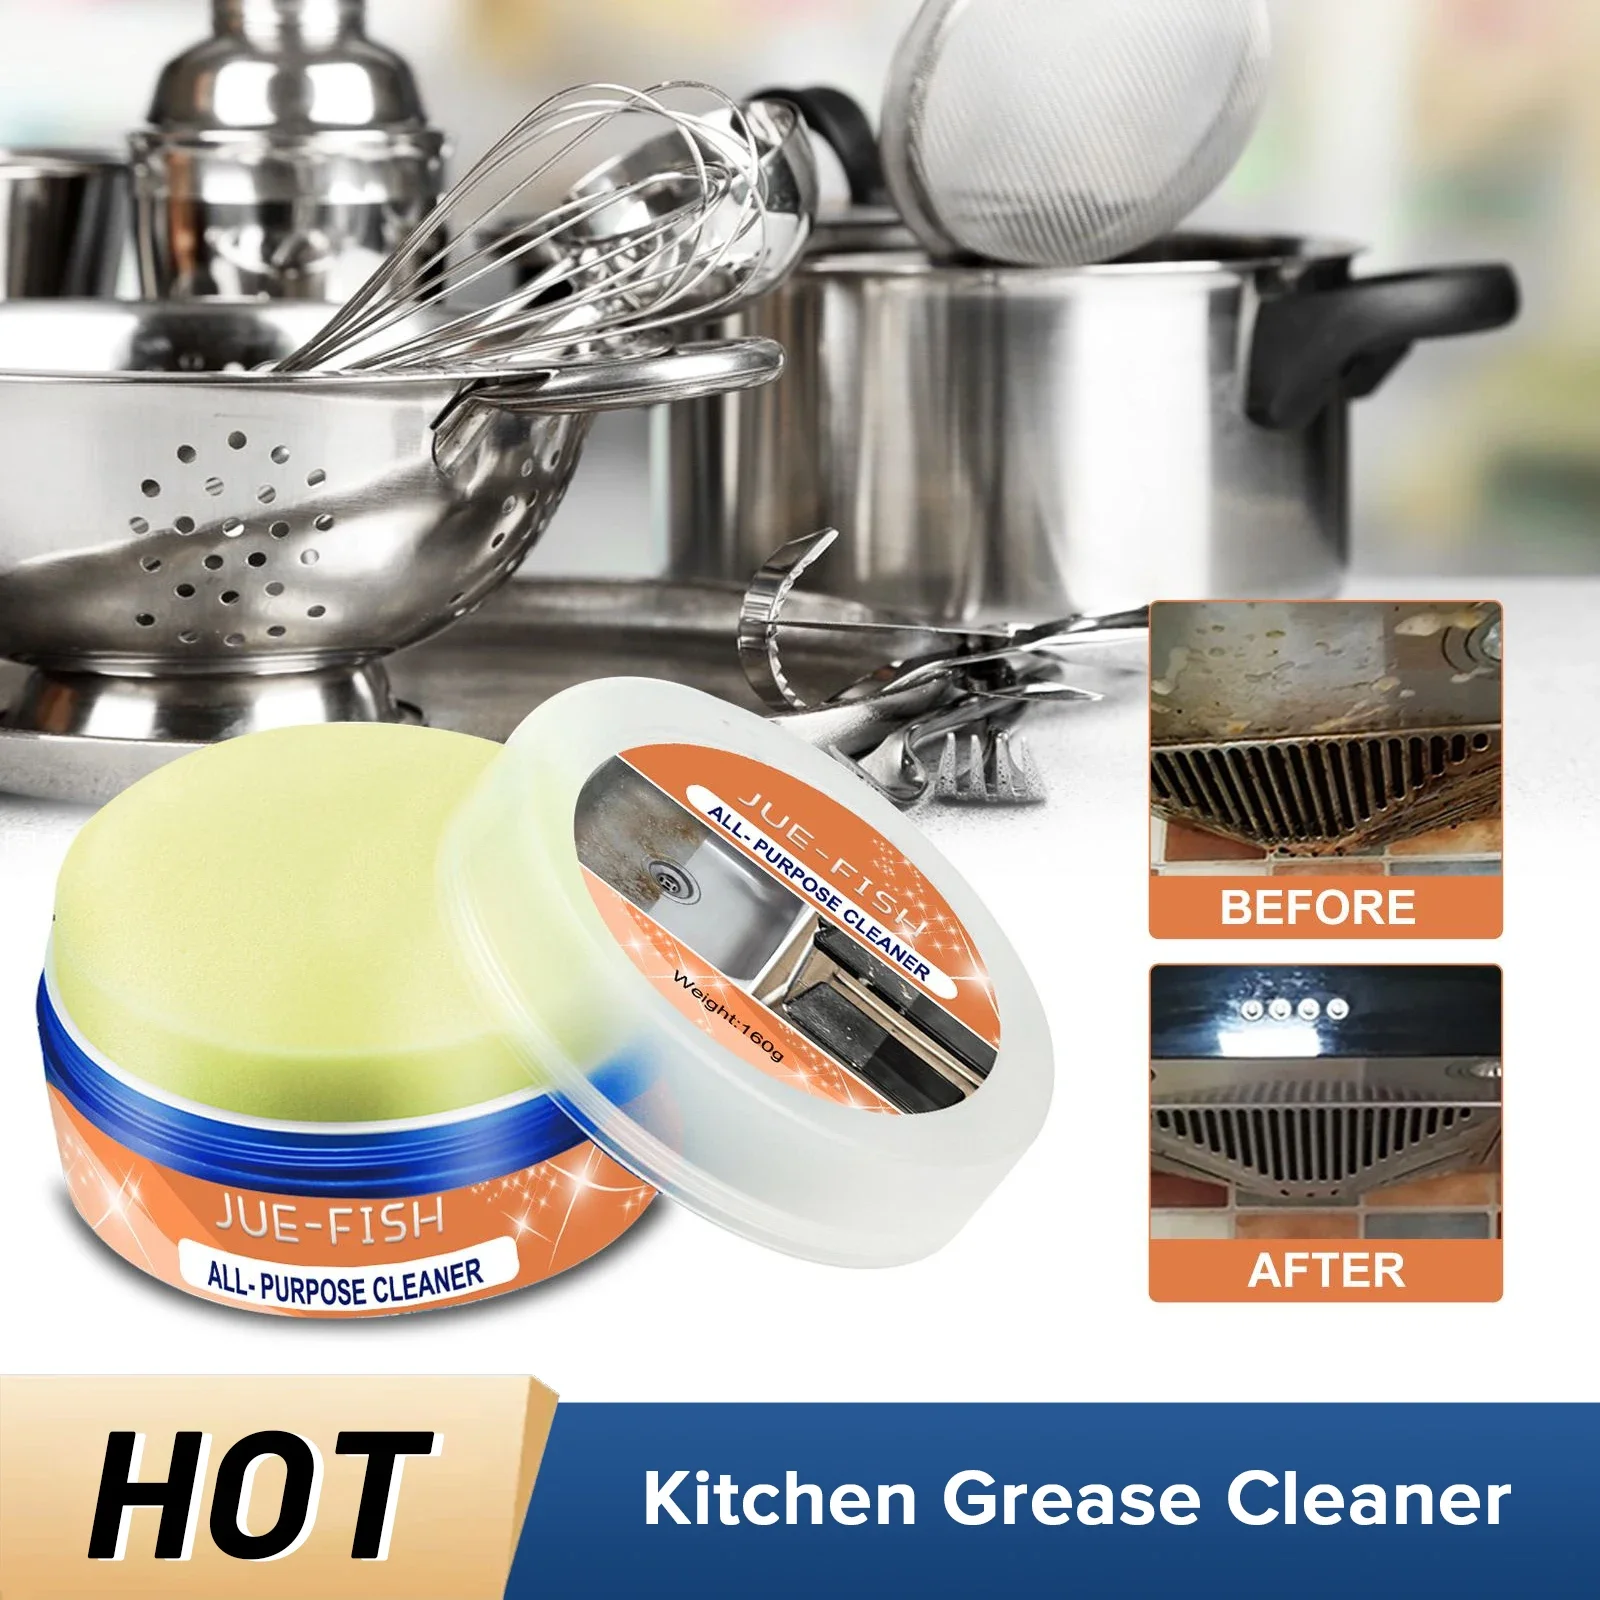 

All Purpose Kitchen Cleaner Removes Grease Grime Oil Stain Clean Stubborn Dirt Range Hood Stove Oven Household Grease Detergent